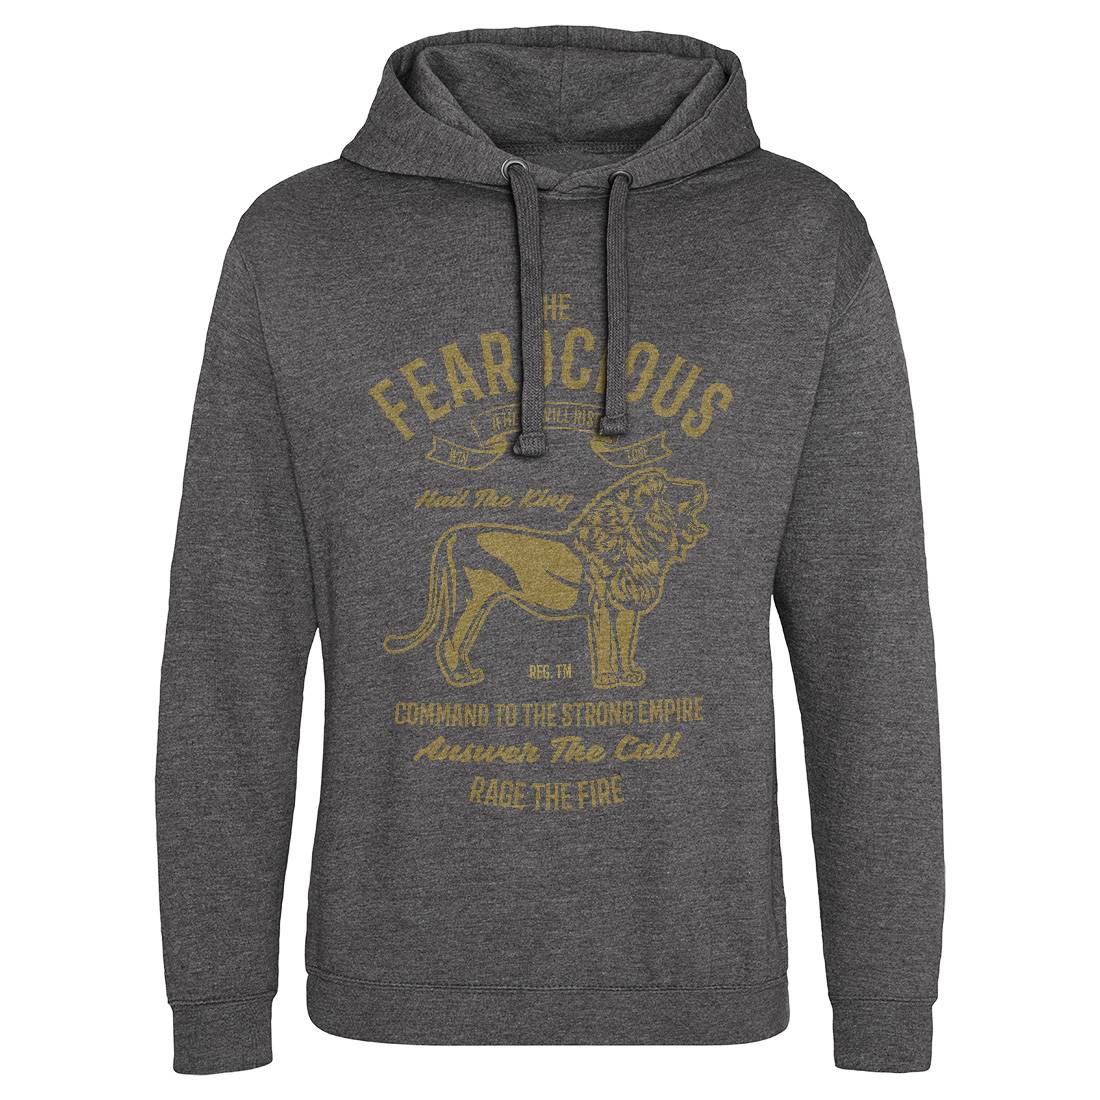 The Ferocious Mens Hoodie Without Pocket Animals B263